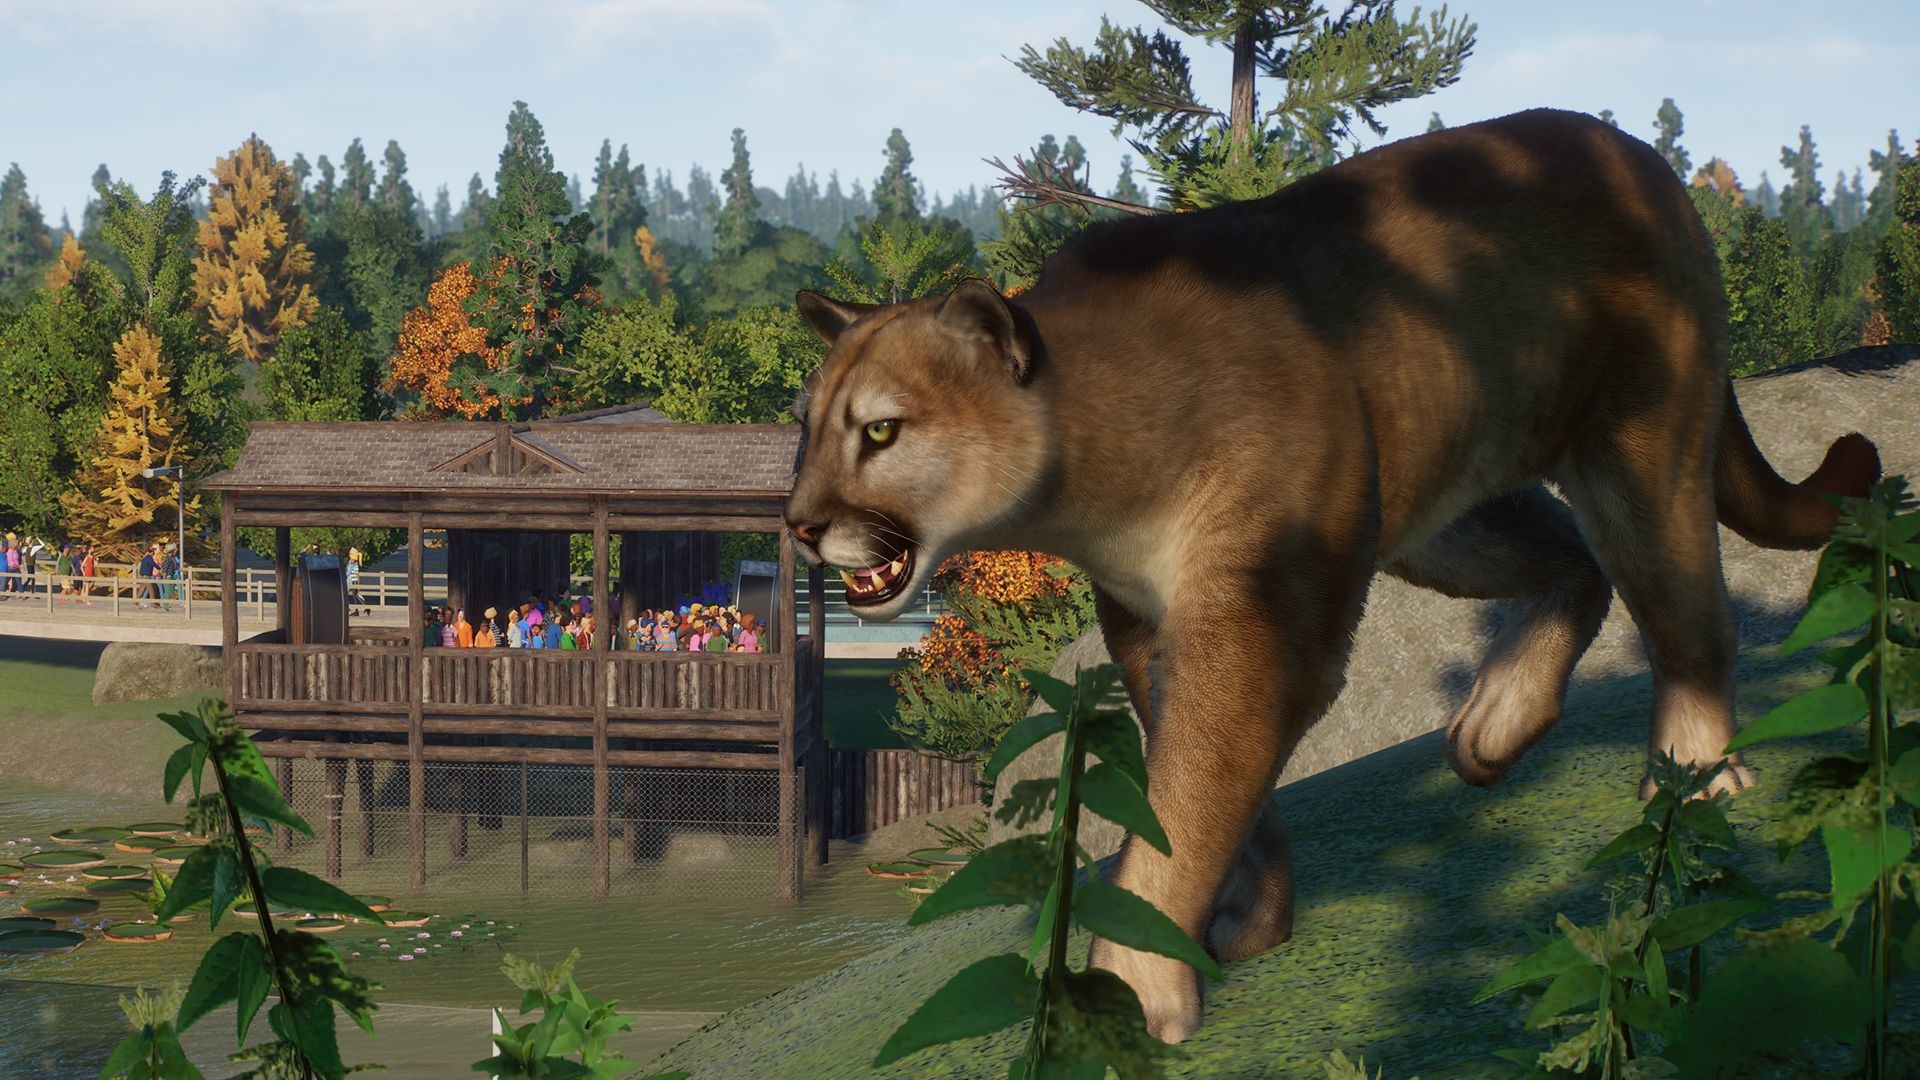 Planet Zoo: North America Animal Pack on Steam